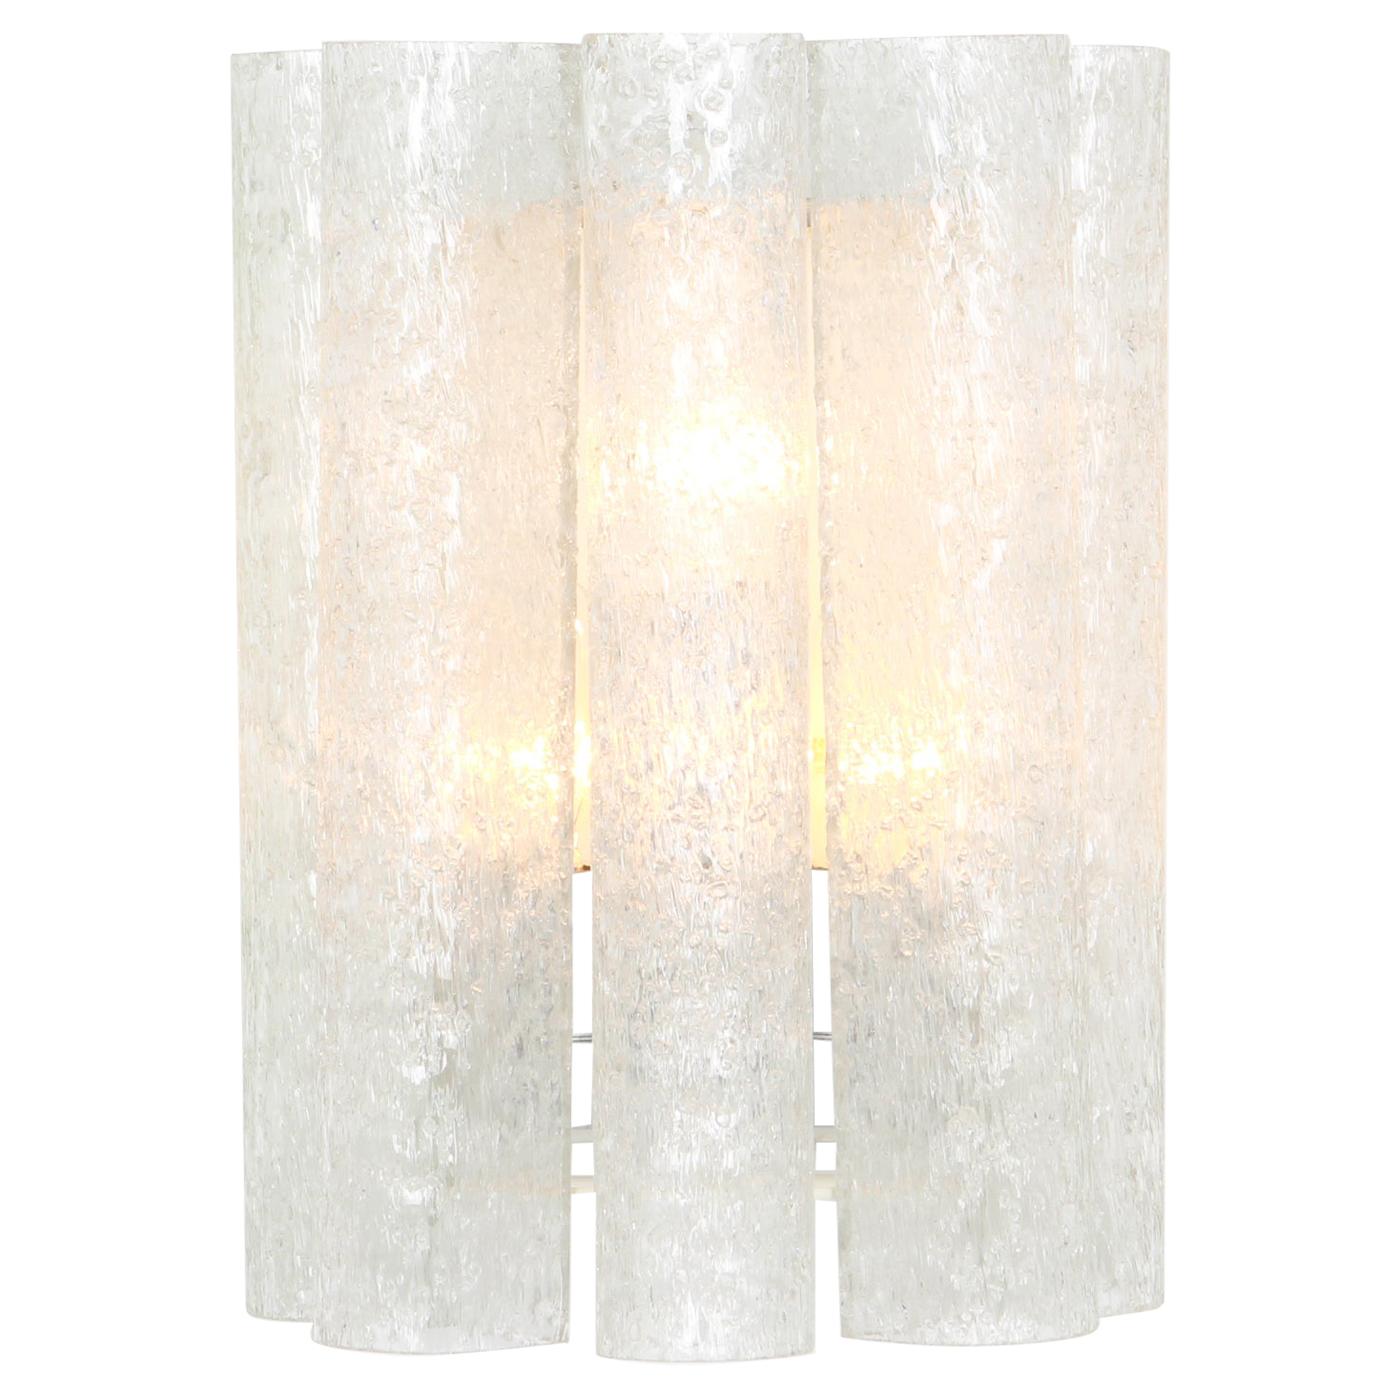 1 of 3 Large Murano Glass Wall Sconces by Doria, Germany, 1960s